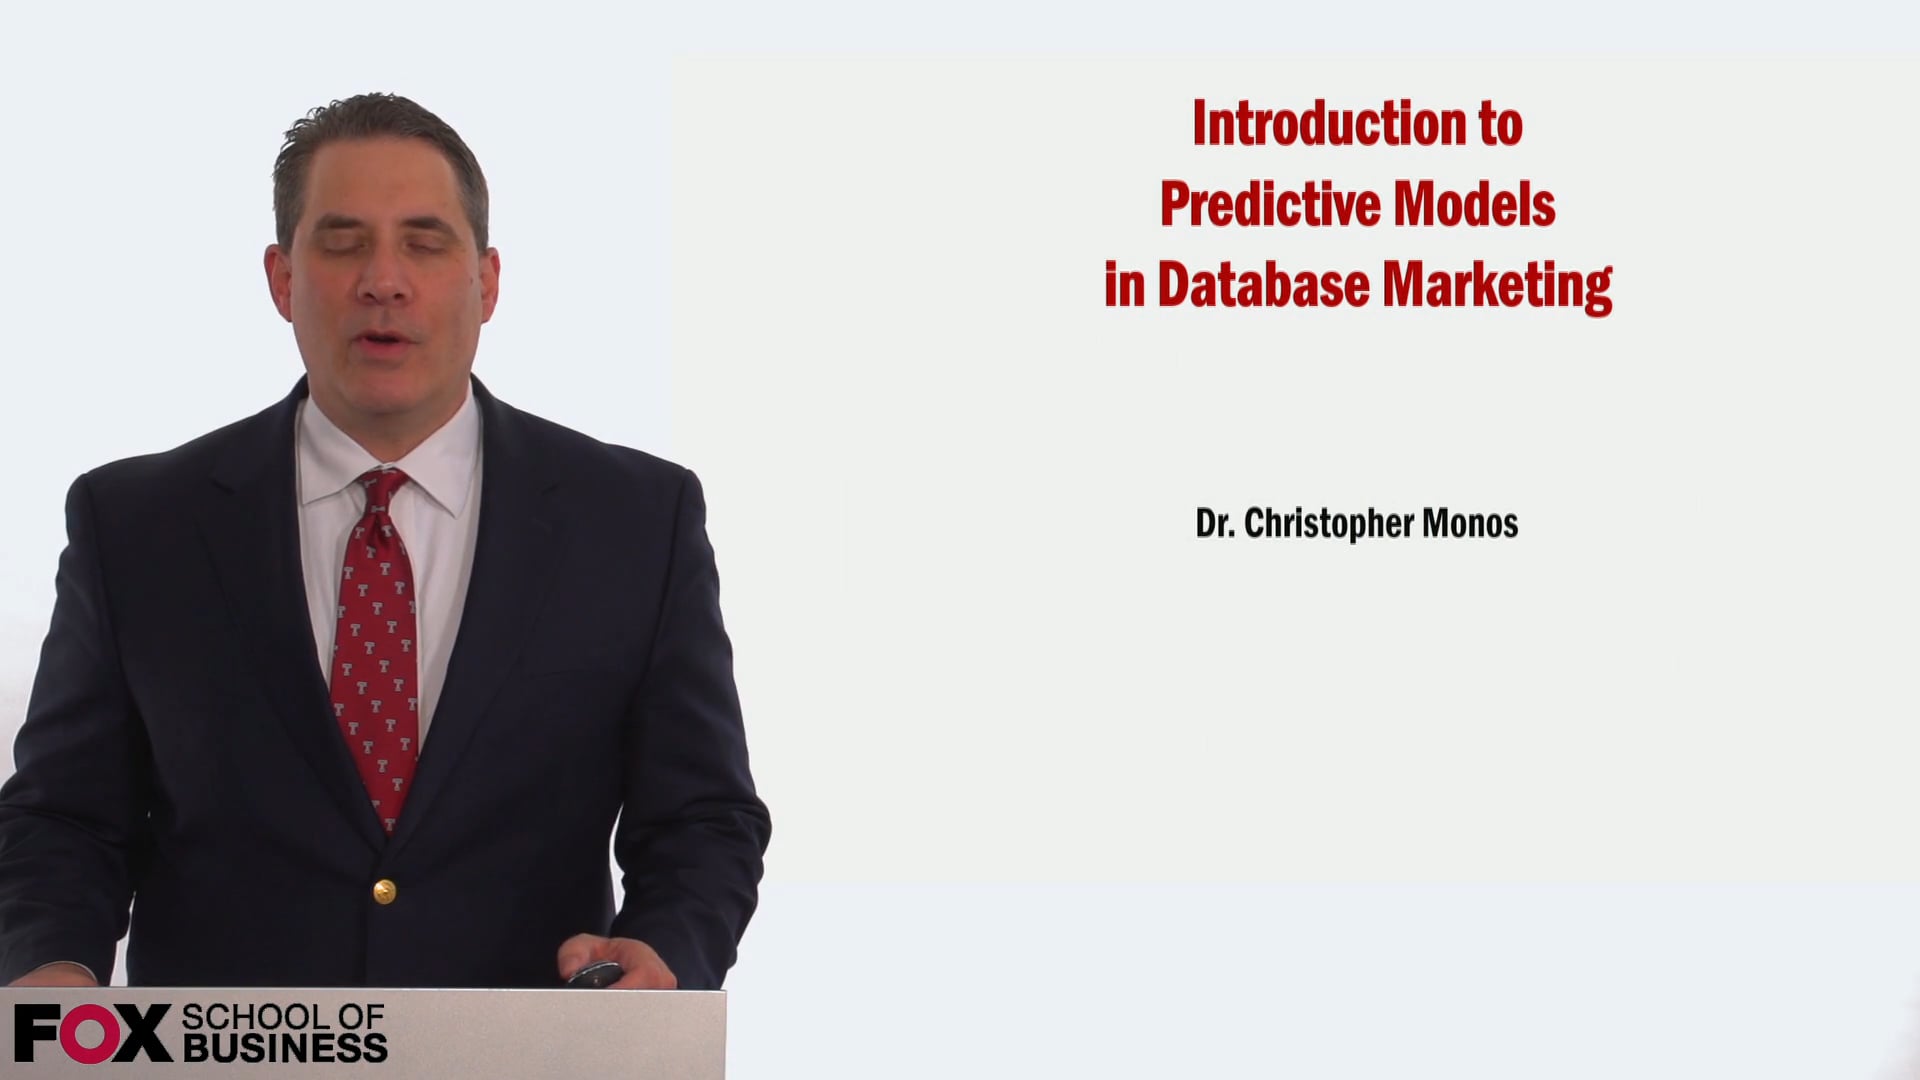 Introduction to Predictive Models in Database Marketing